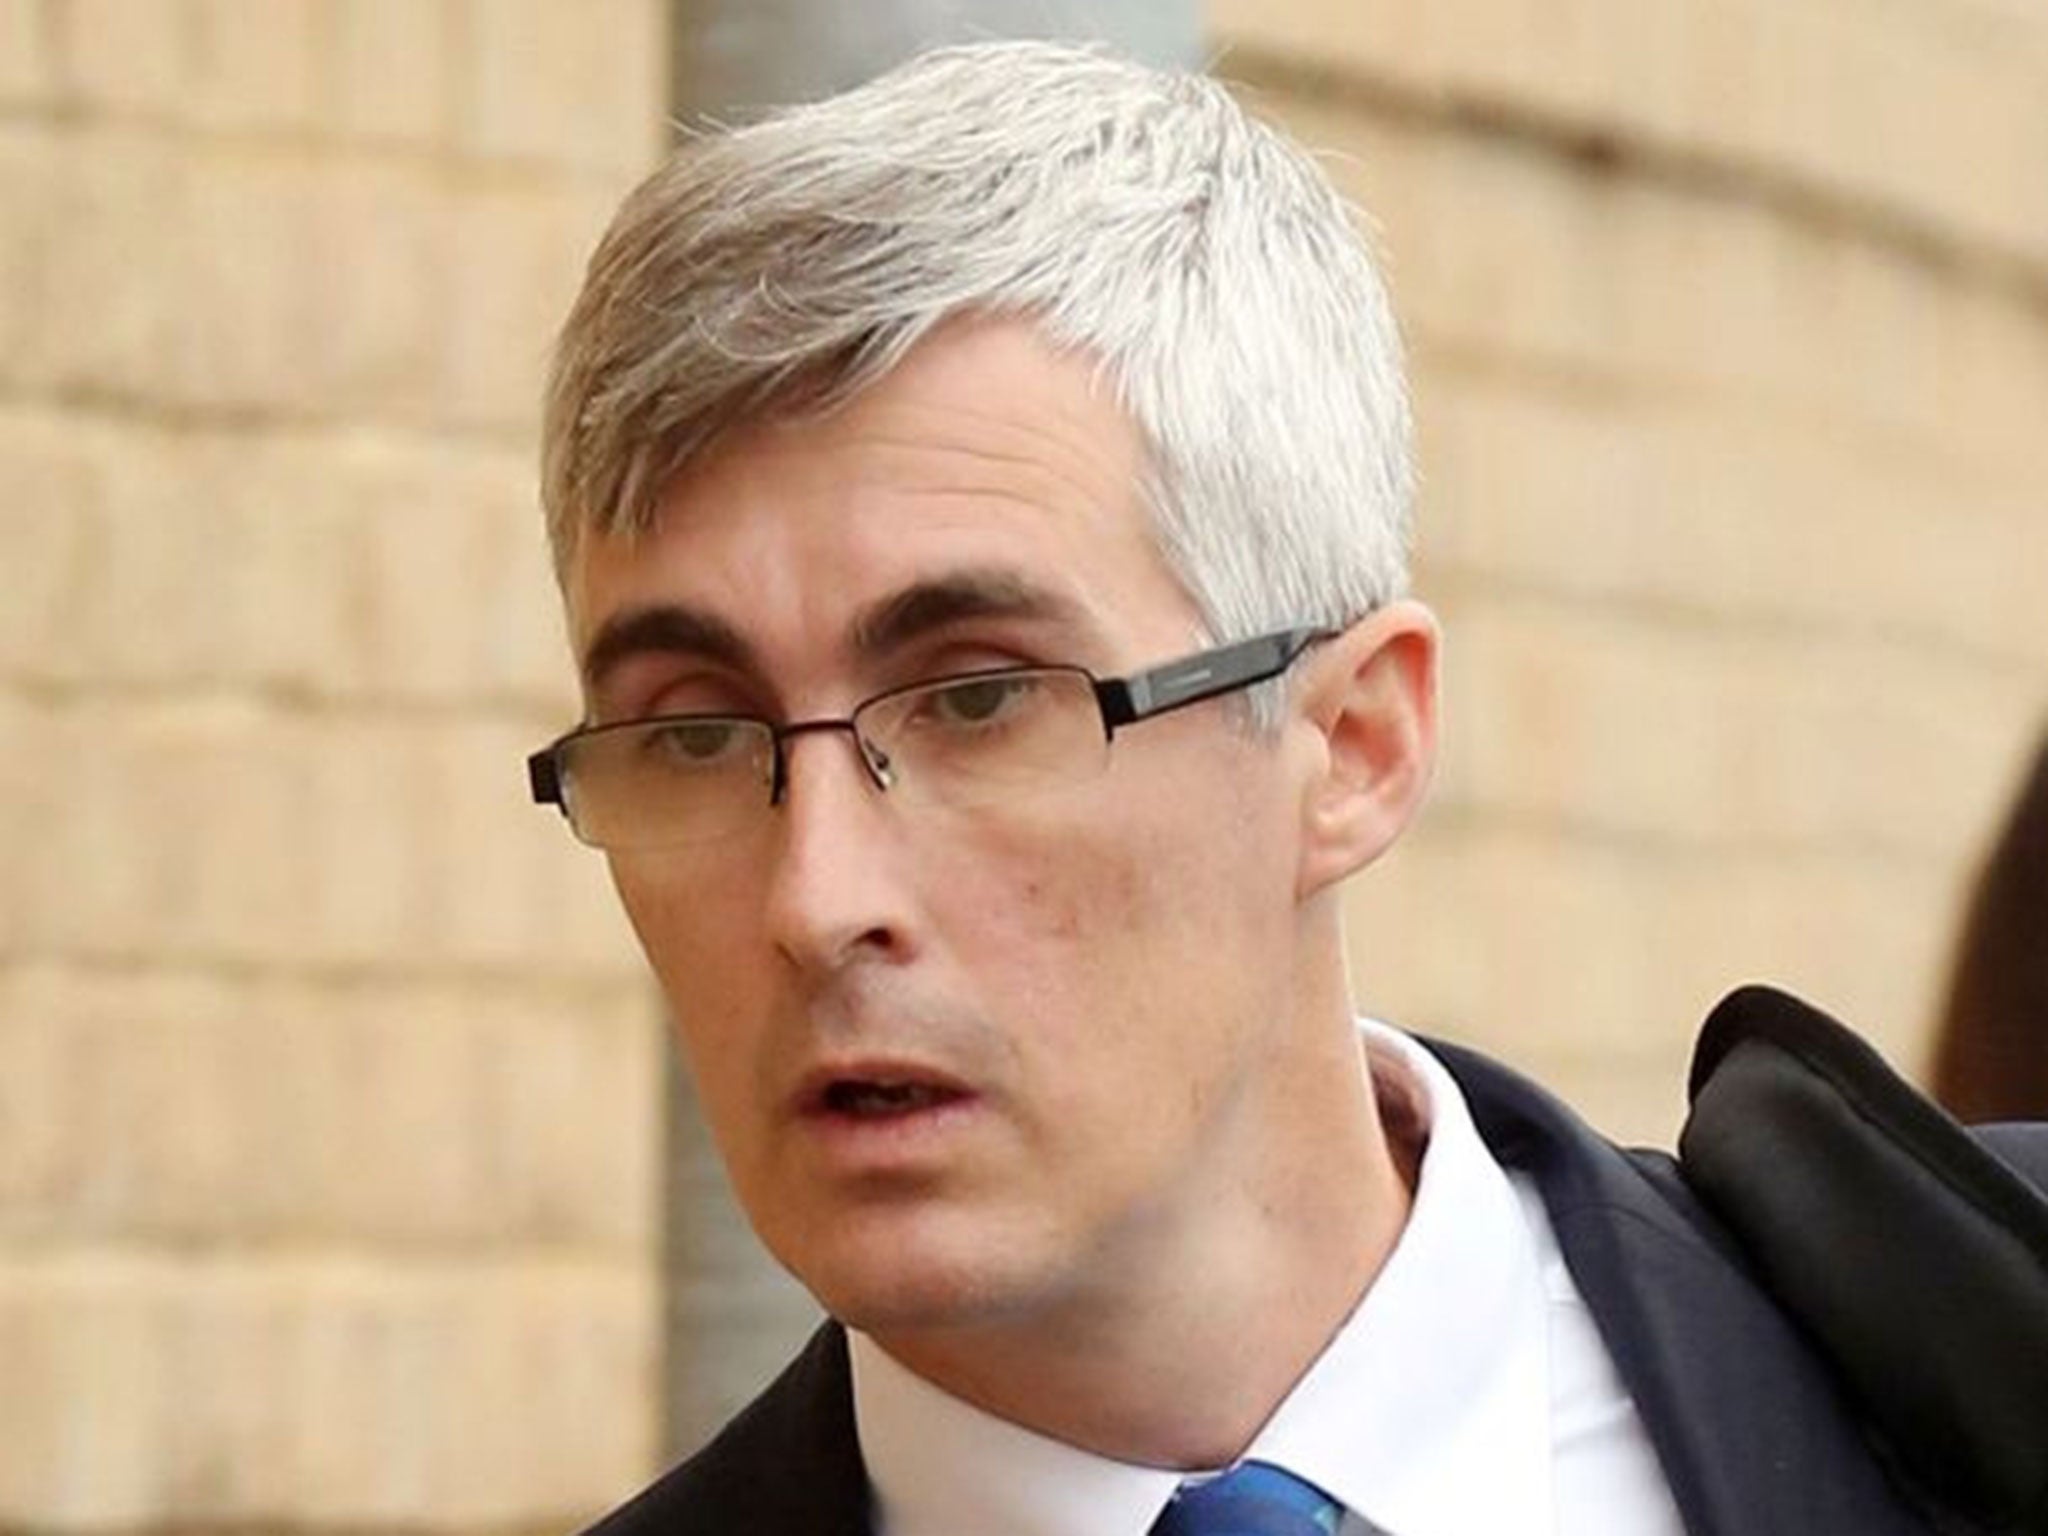 Dr Myles Bradbury, 41, as Cambridge Crown Court has heard that Bradbury, who admitted abusing boys in his care had escaped detection for more than four years because parents trusted and respected him